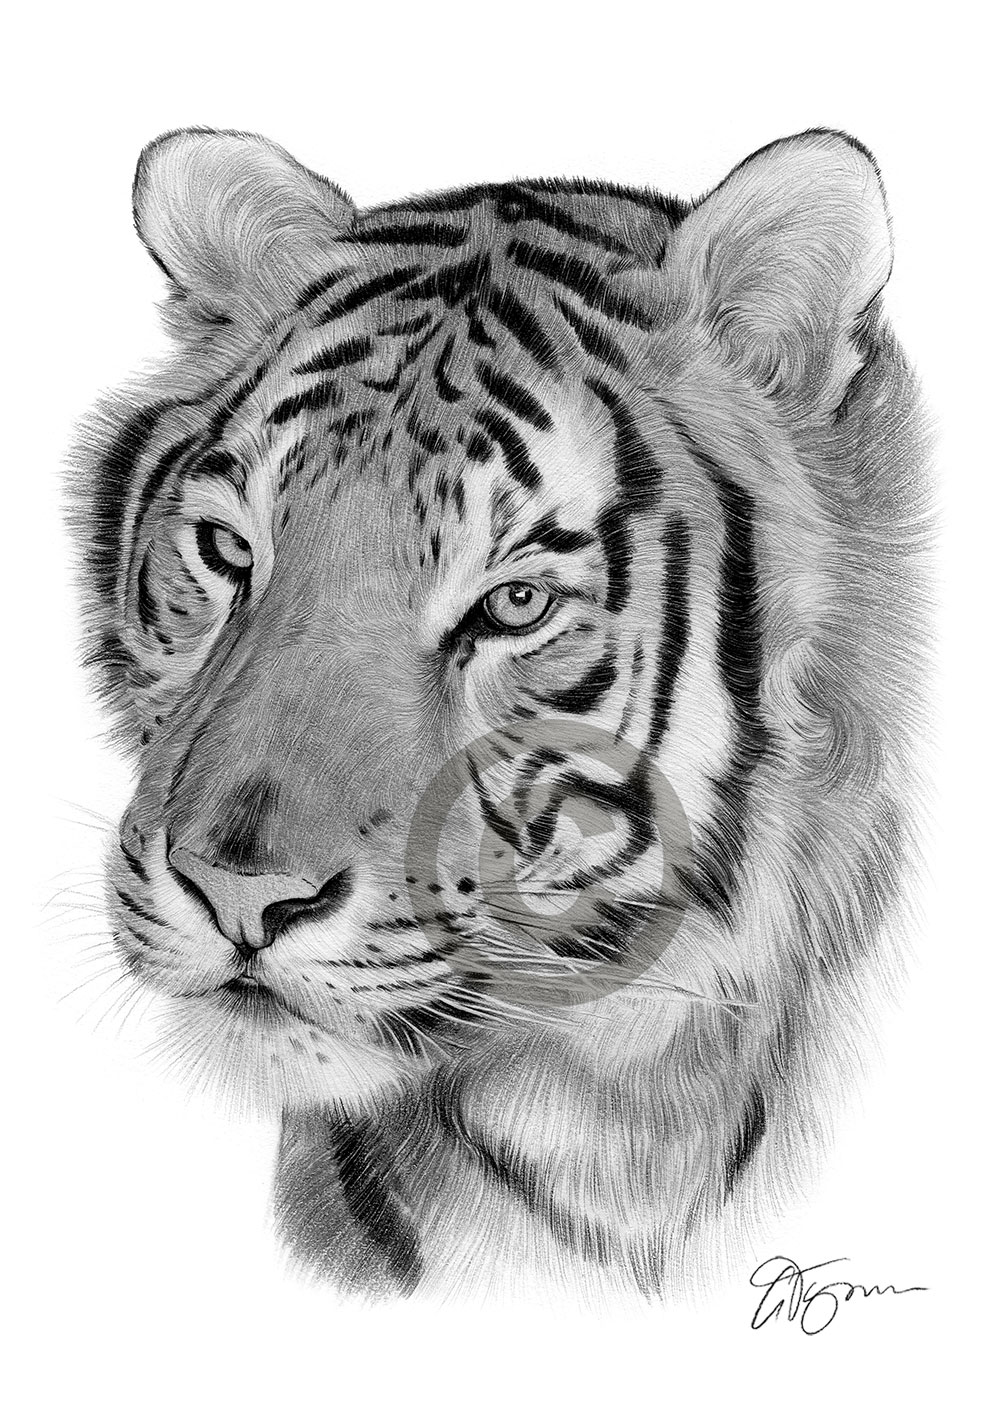 Tiger Face Speed Drawing  Pencil Sketch of Tiger Face  YouTube